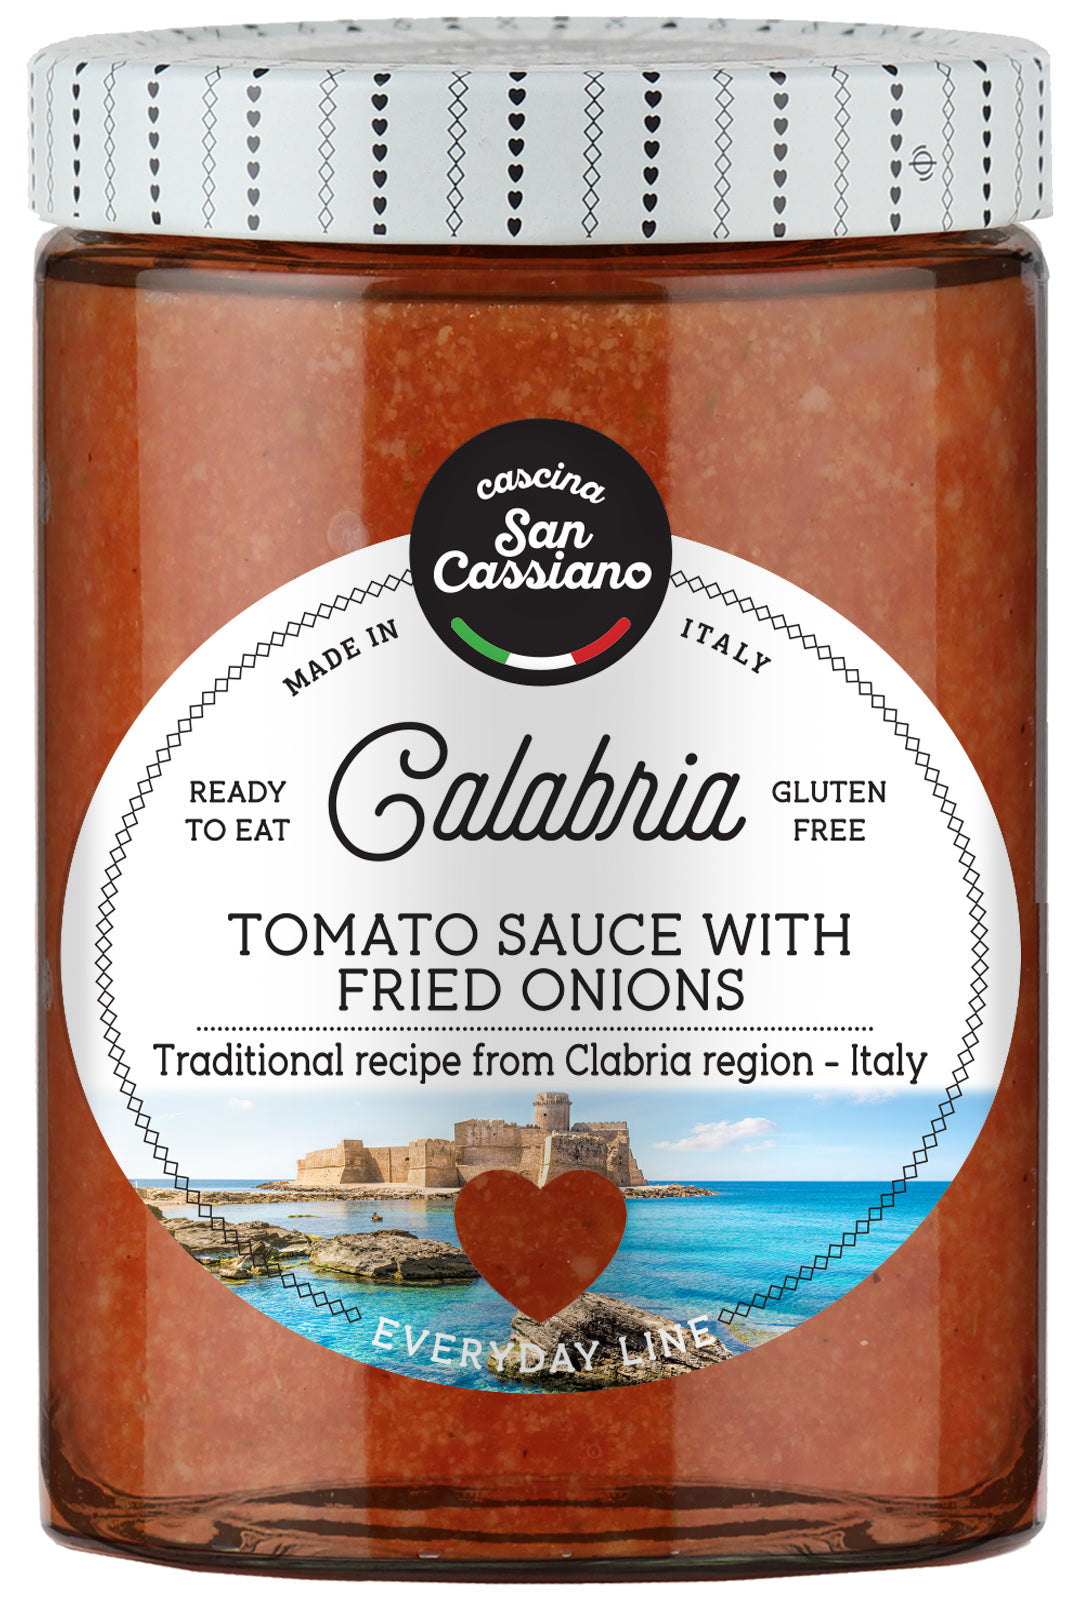 Calabria sauce - Tomato sauce with fried onions